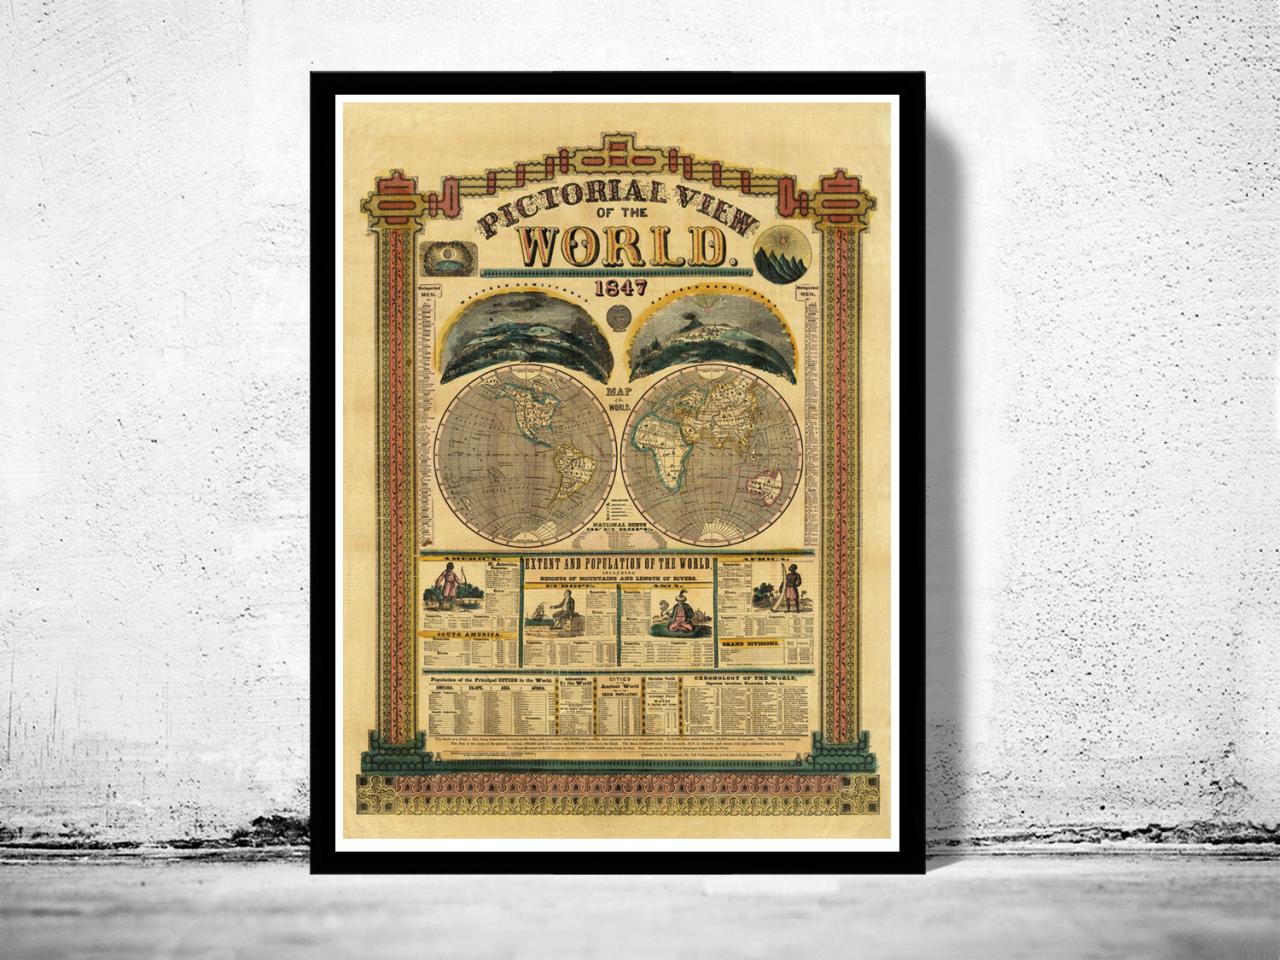 Vintage Pictorial World Map 1847 with interesting historical information